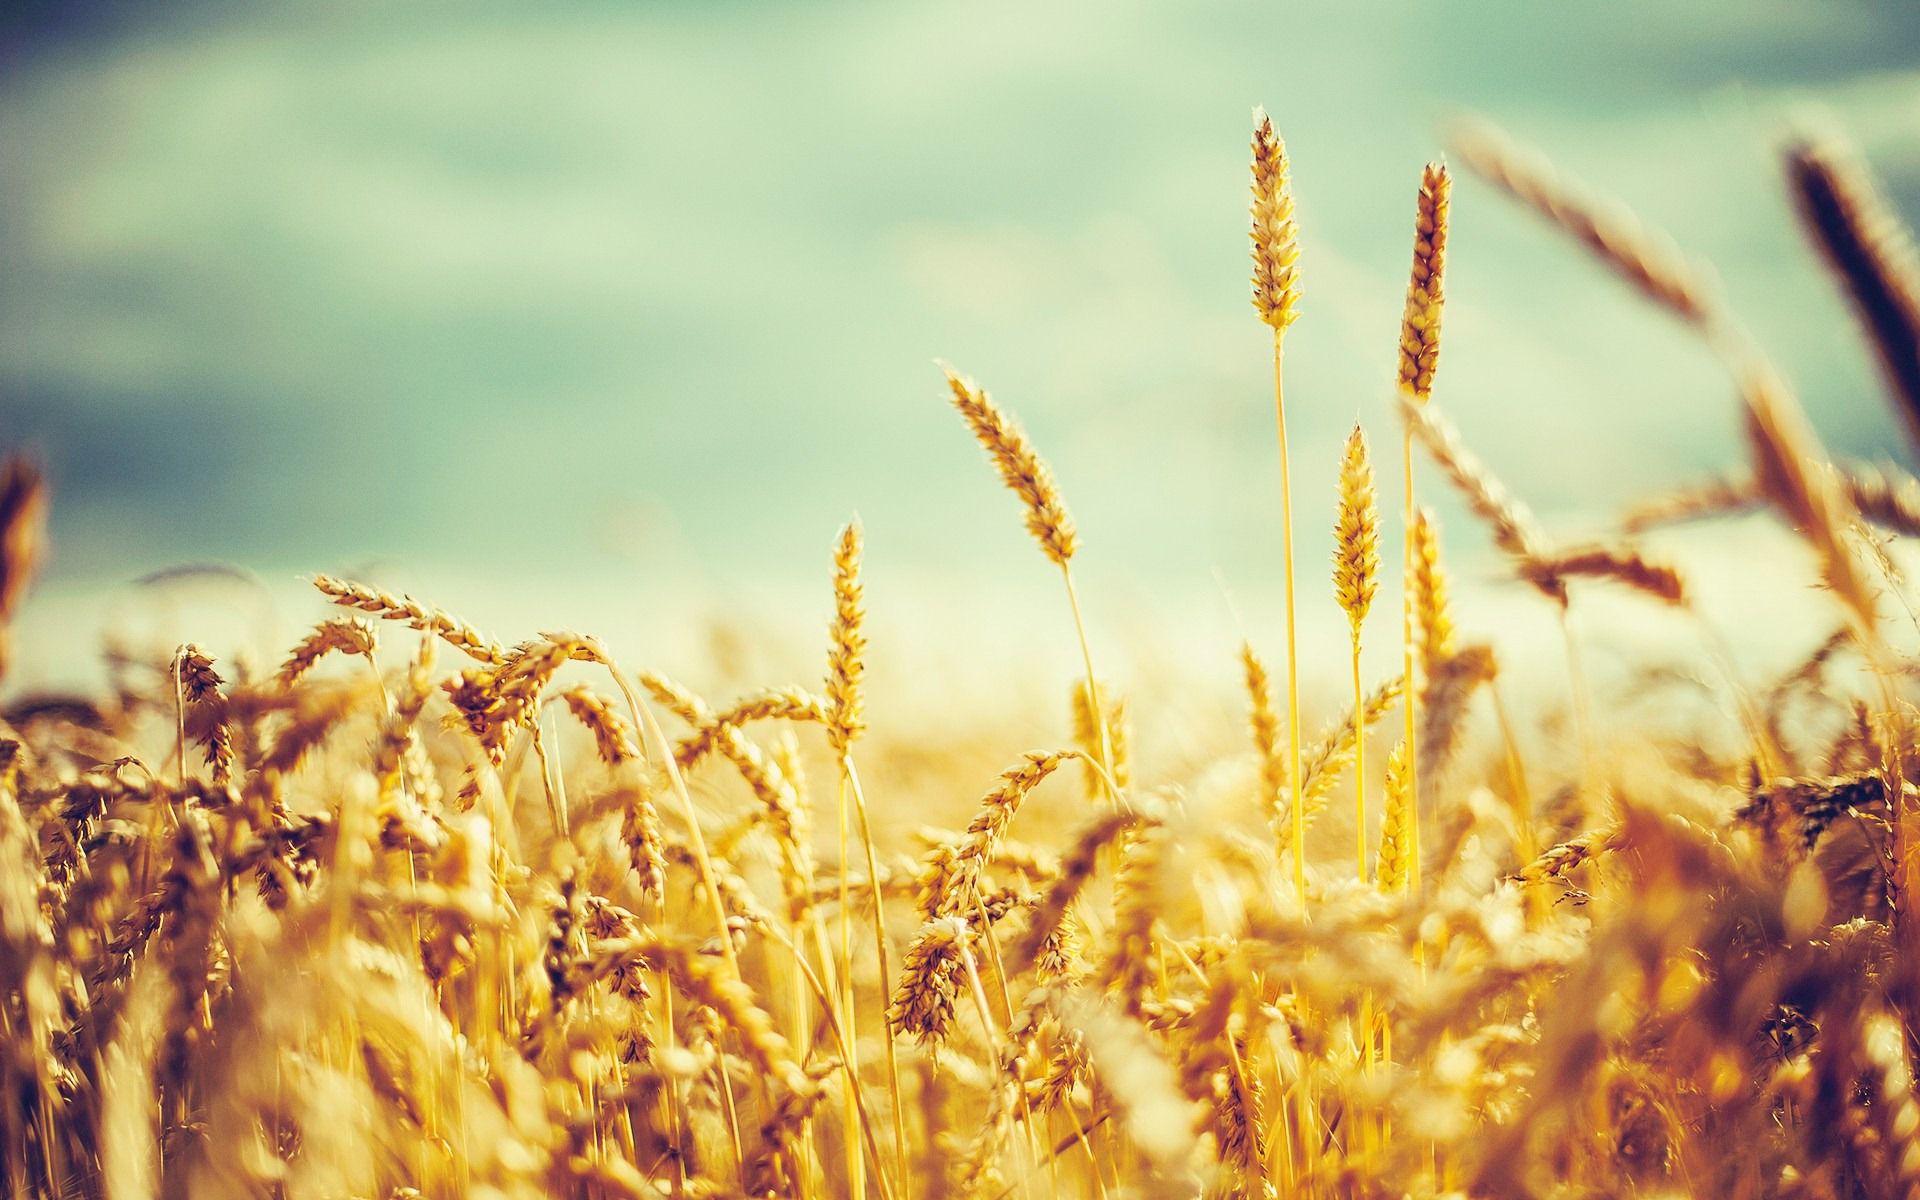 Wheat Wallpaper, High Quality Image of Wheat in Popular Collection